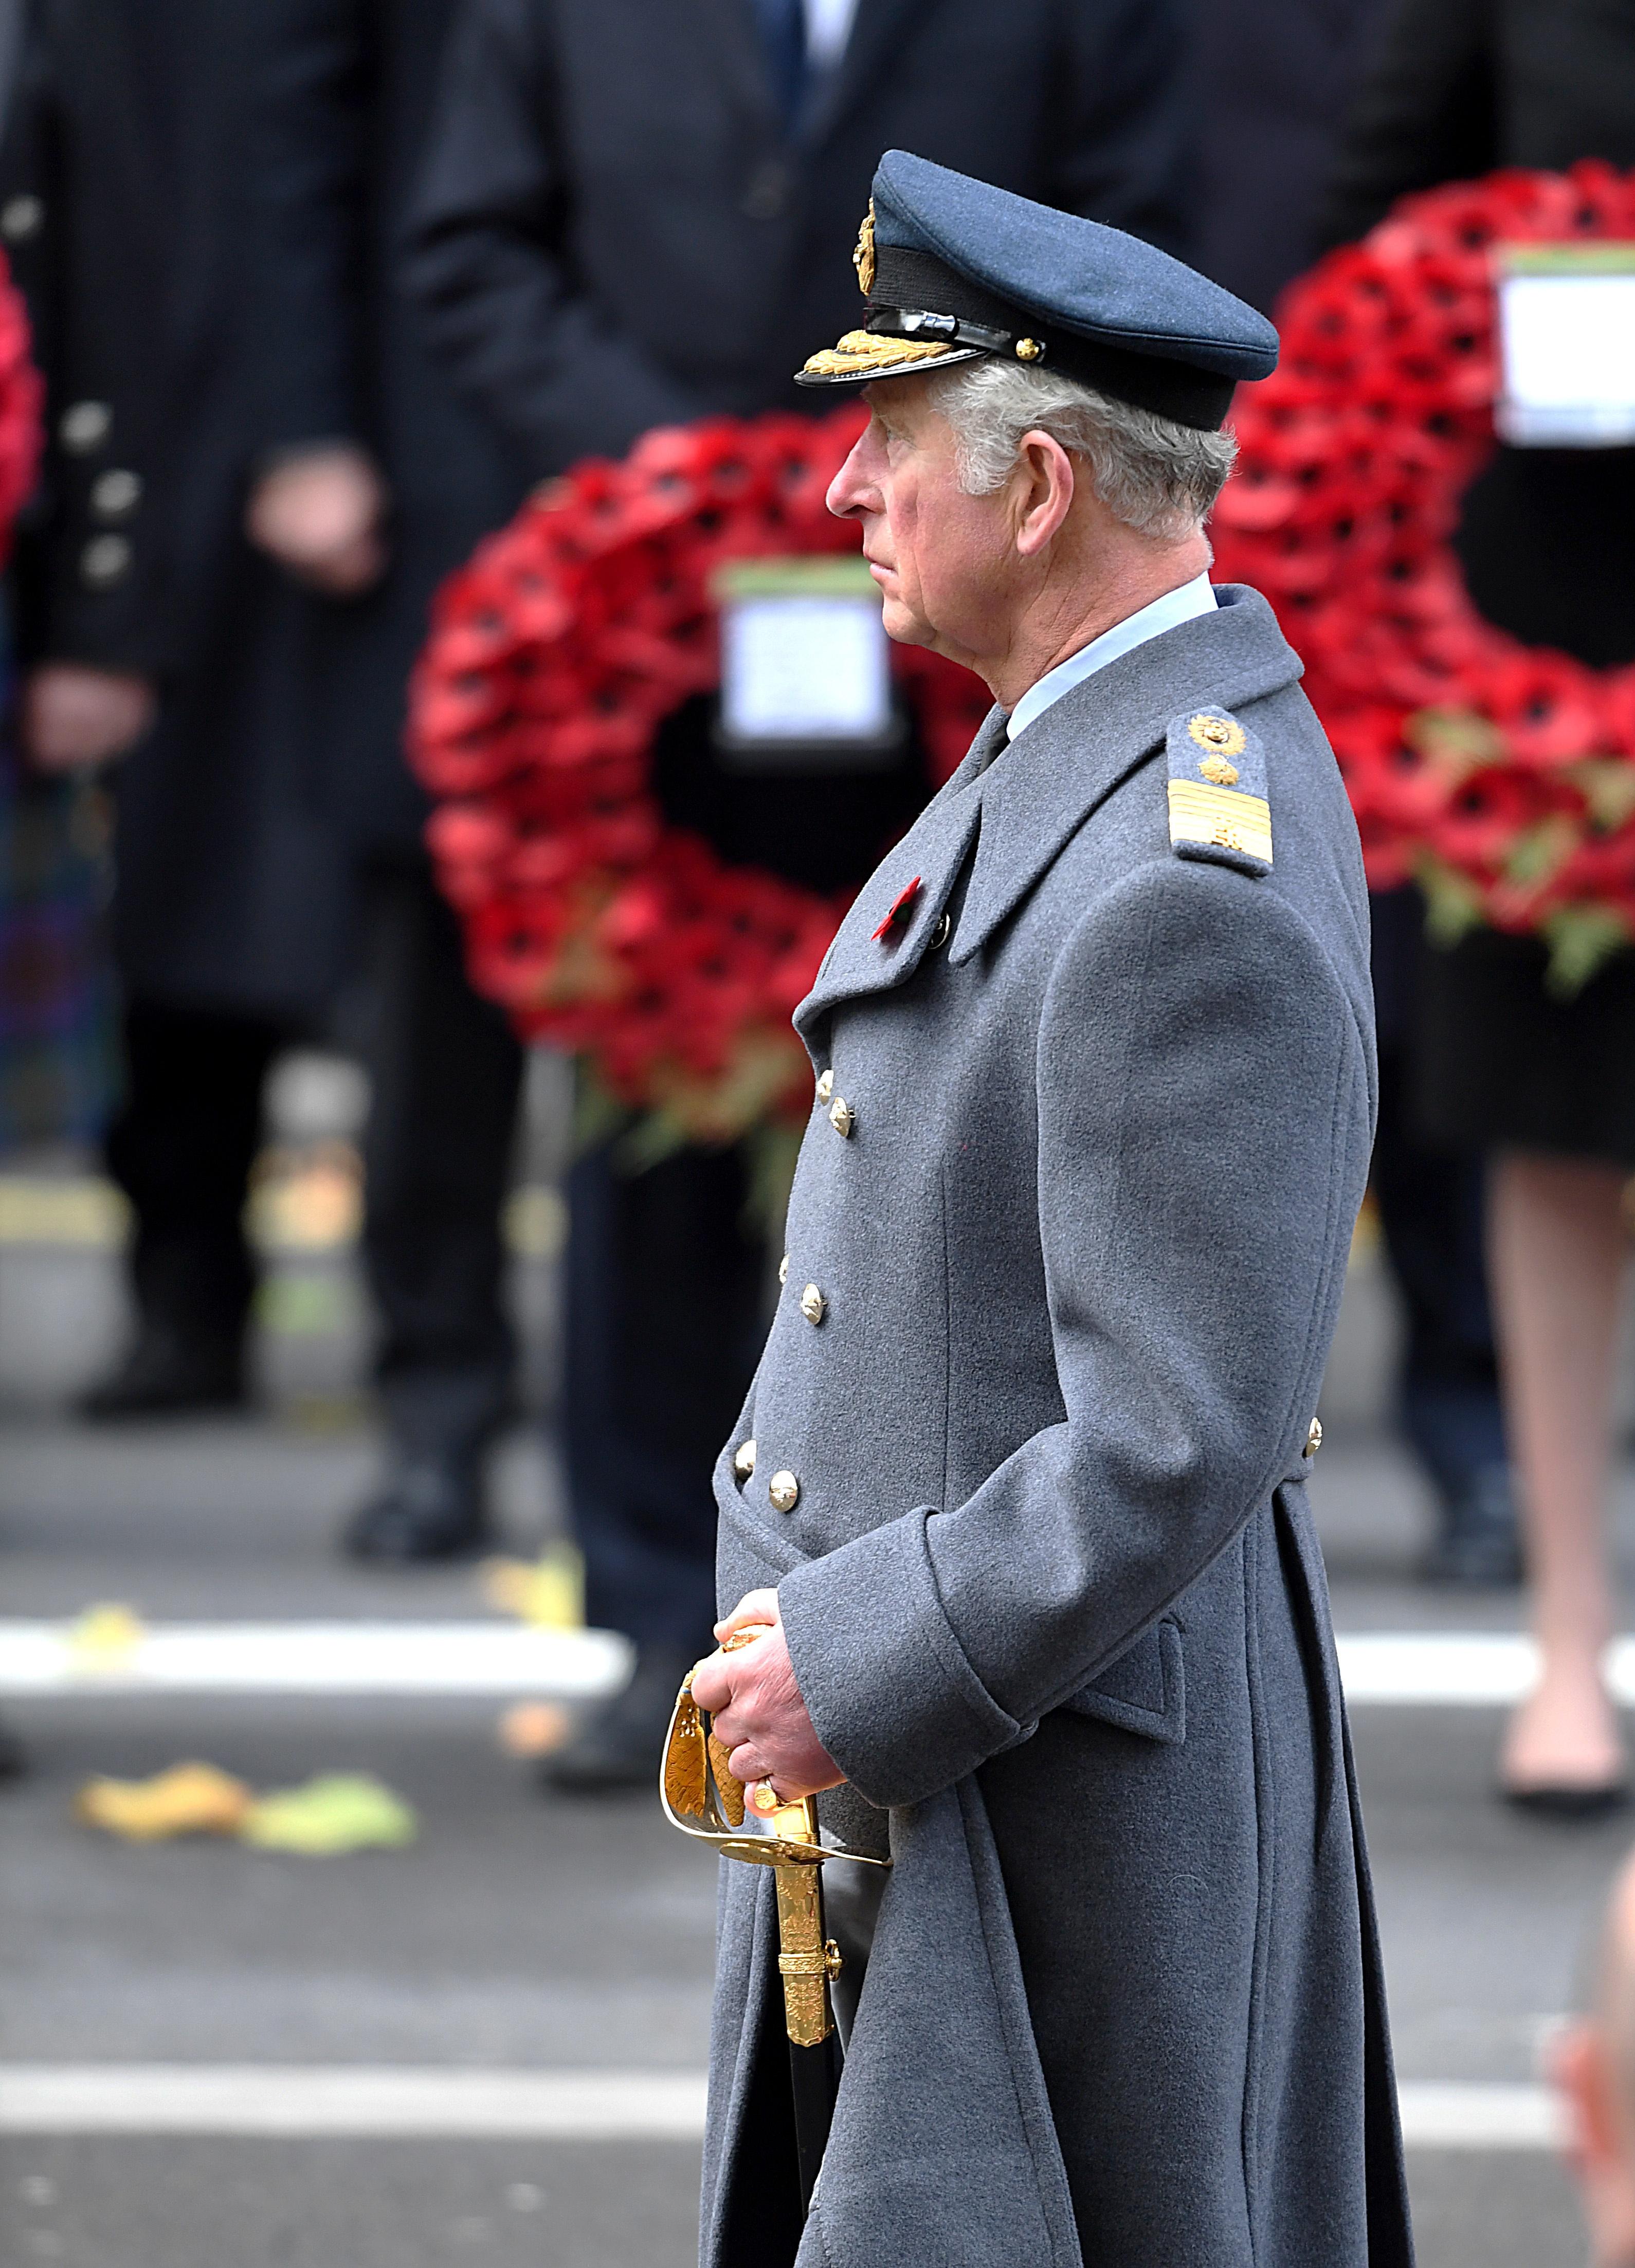 The Prince of Wales attends the annual Remembrance Sunday Service at the Cenotaph in London.